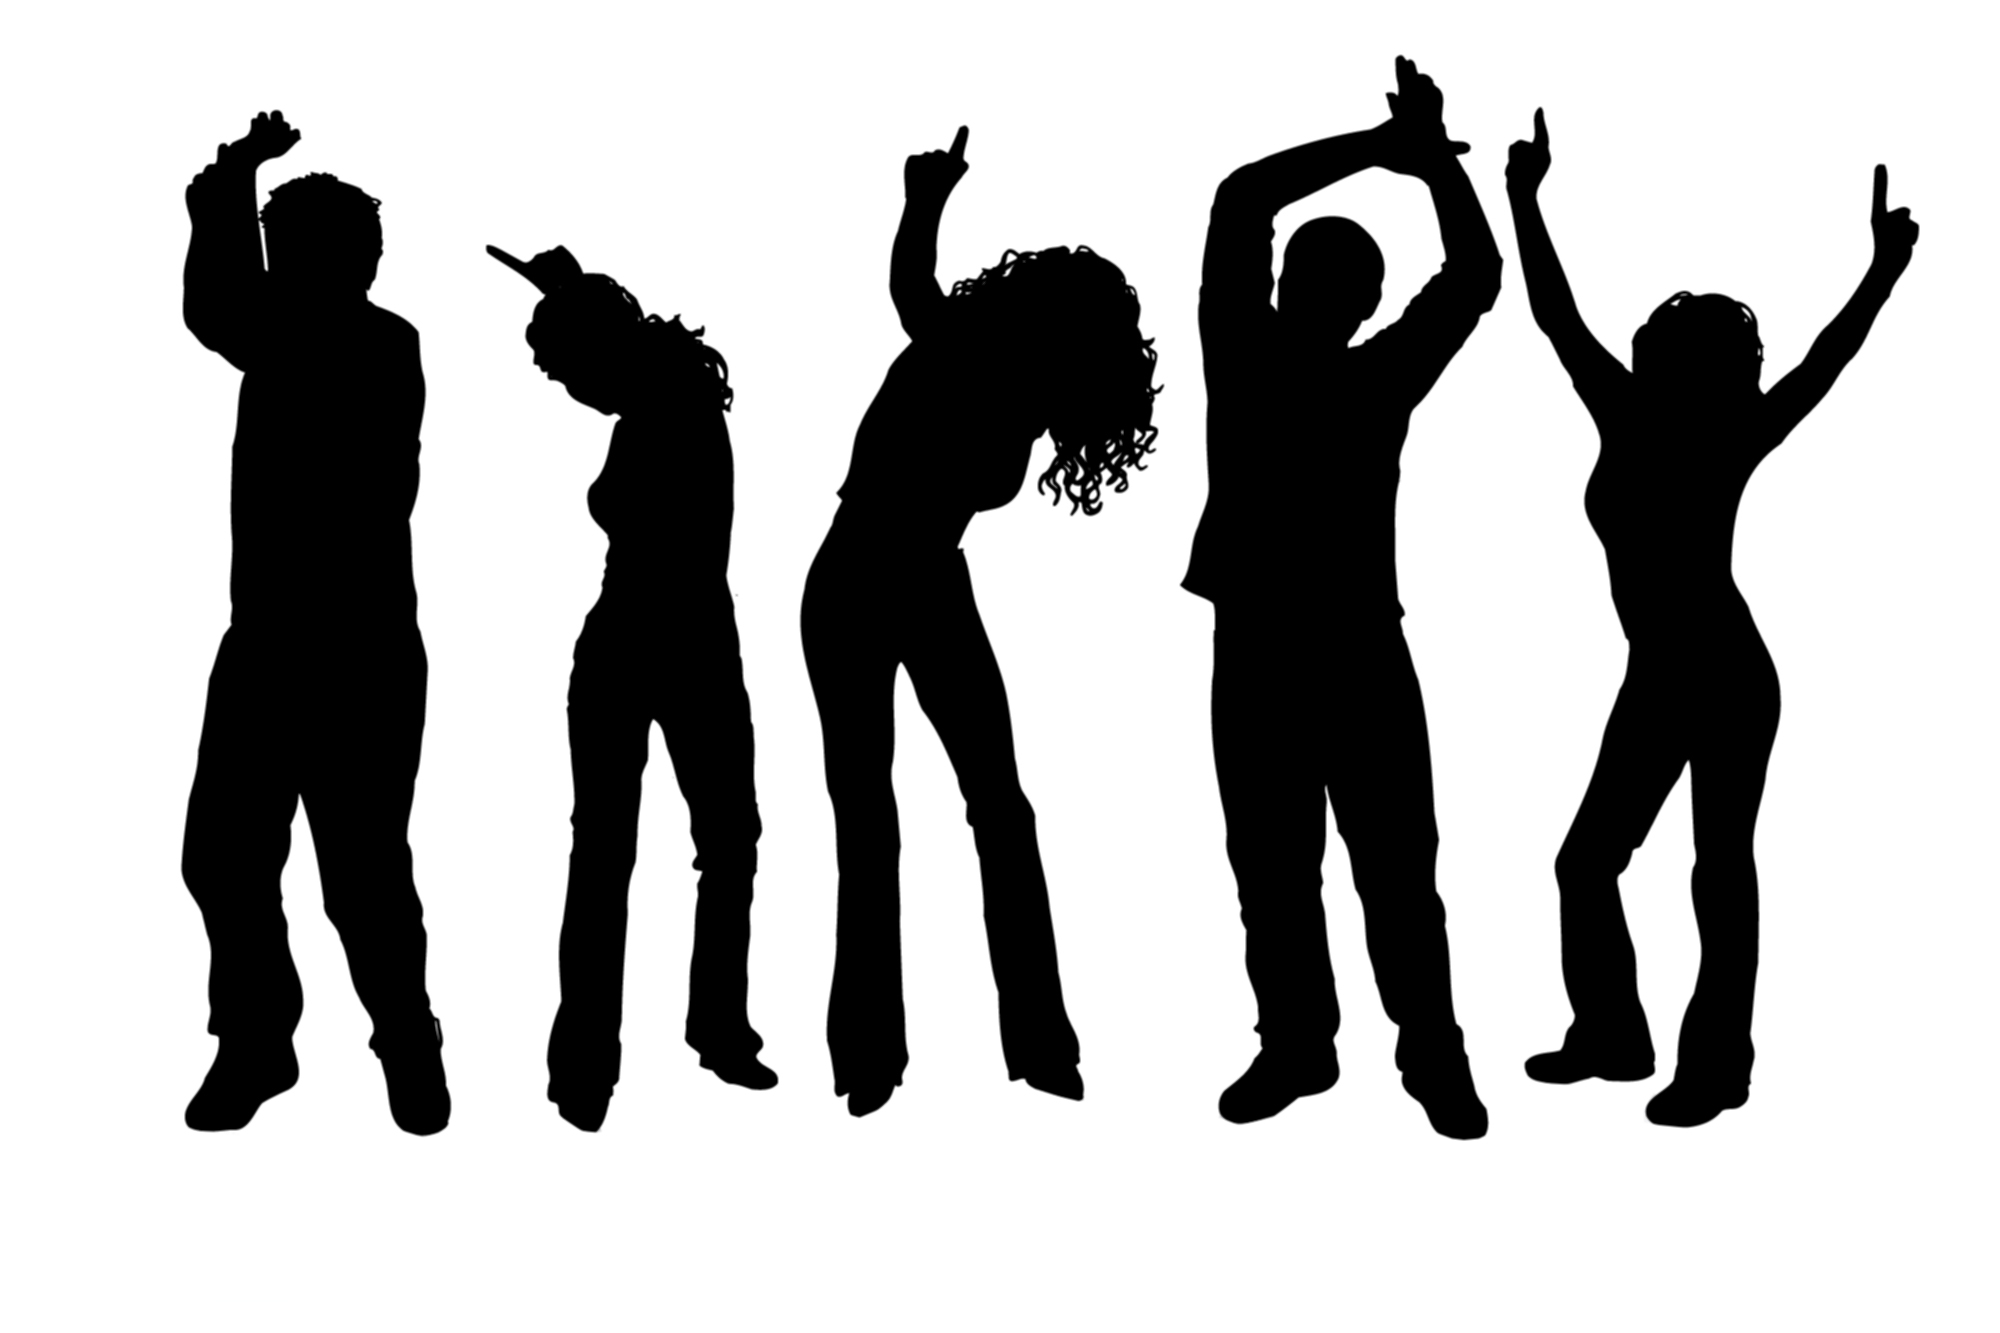 Dance party clipart free clipart images 2